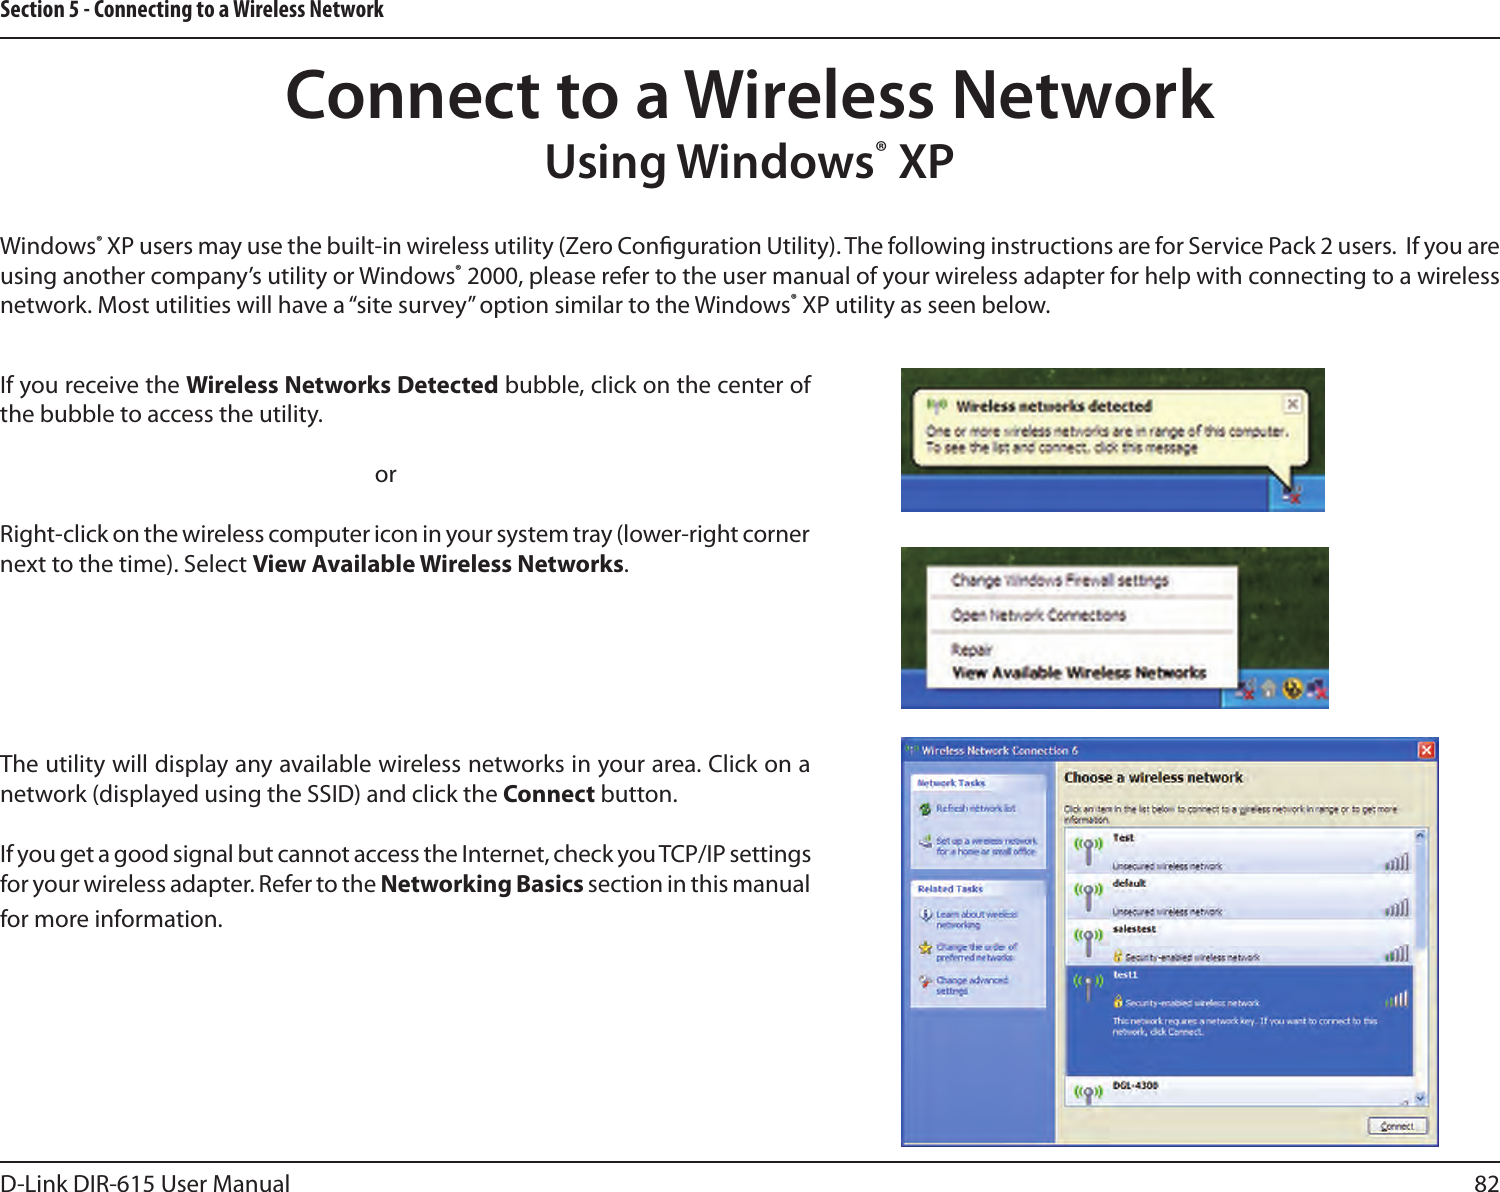 82D-Link DIR-615 User ManualSection 5 - Connecting to a Wireless NetworkWindows® XP users may use the built-in wireless utility (Zero Conguration Utility). The following instructions are for Service Pack 2 users.  If you are using another company’s utility or Windows® 2000, please refer to the user manual of your wireless adapter for help with connecting to a wireless network. Most utilities will have a “site survey” option similar to the Windows® XP utility as seen below.If you receive the Wireless Networks Detected bubble, click on the center of the bubble to access the utility.     orRight-click on the wireless computer icon in your system tray (lower-right corner next to the time). Select View Available Wireless Networks.The utility will display any available wireless networks in your area. Click on a network (displayed using the SSID) and click the Connect button.If you get a good signal but cannot access the Internet, check you TCP/IP settings for your wireless adapter. Refer to the Networking Basics section in this manual for more information.Connect to a Wireless NetworkUsing Windows® XP